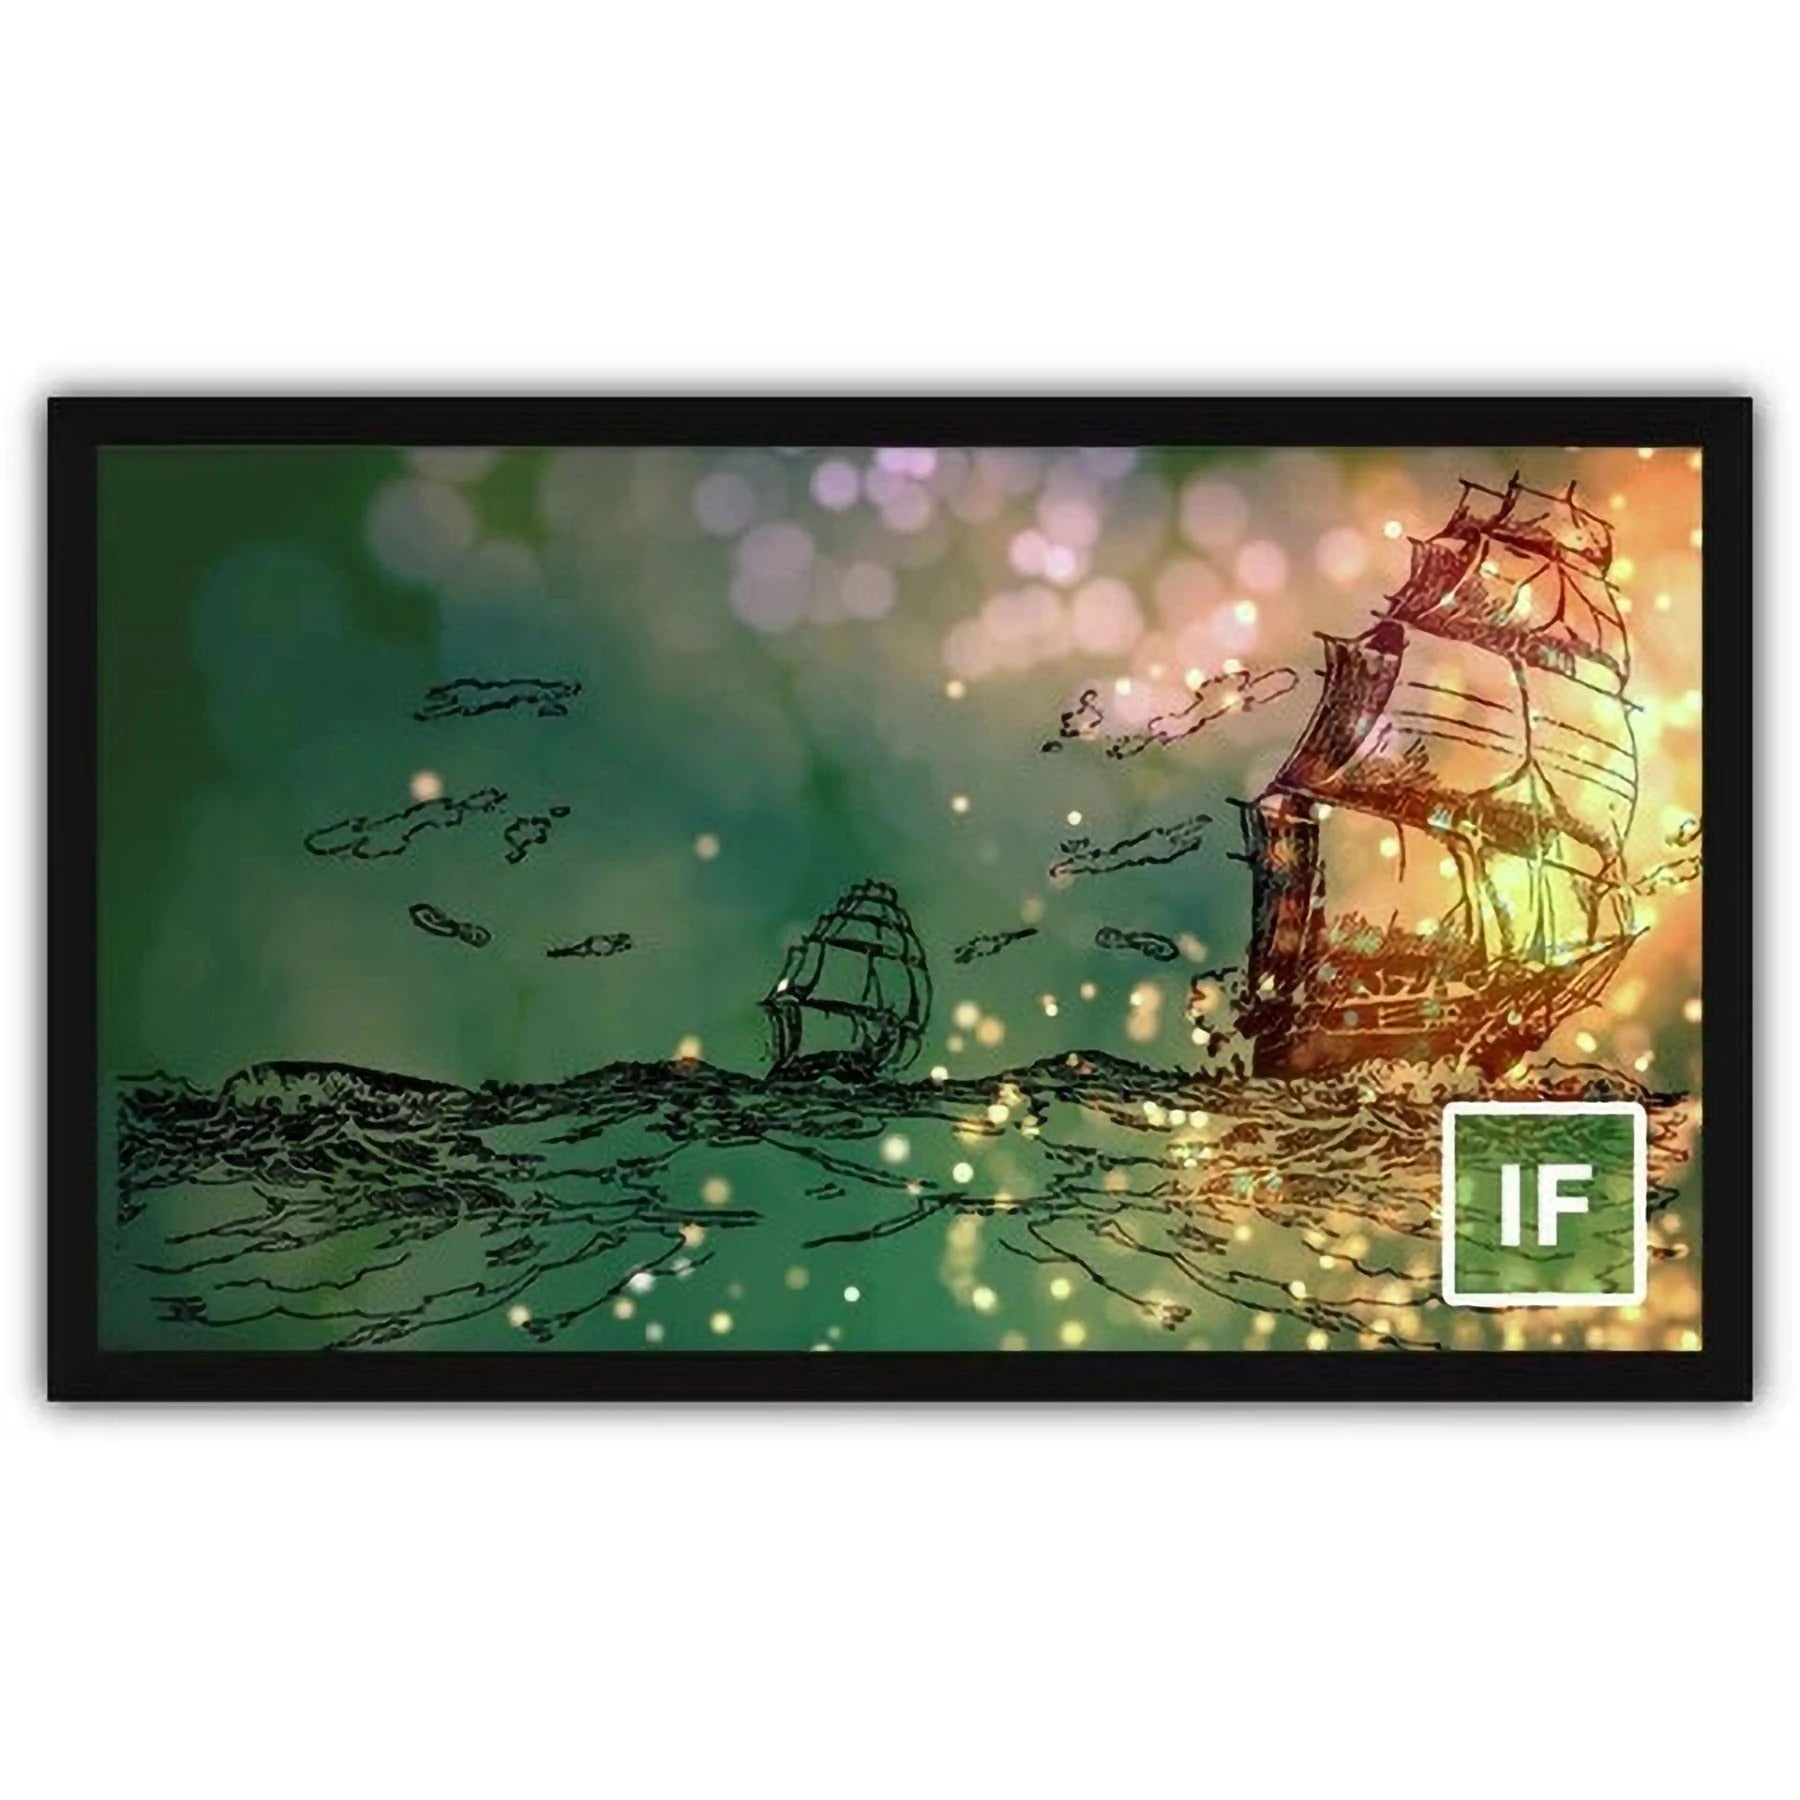 Severtson Screens Impression Series 2.35:1 158-inch Fixed Frame Projection Screen